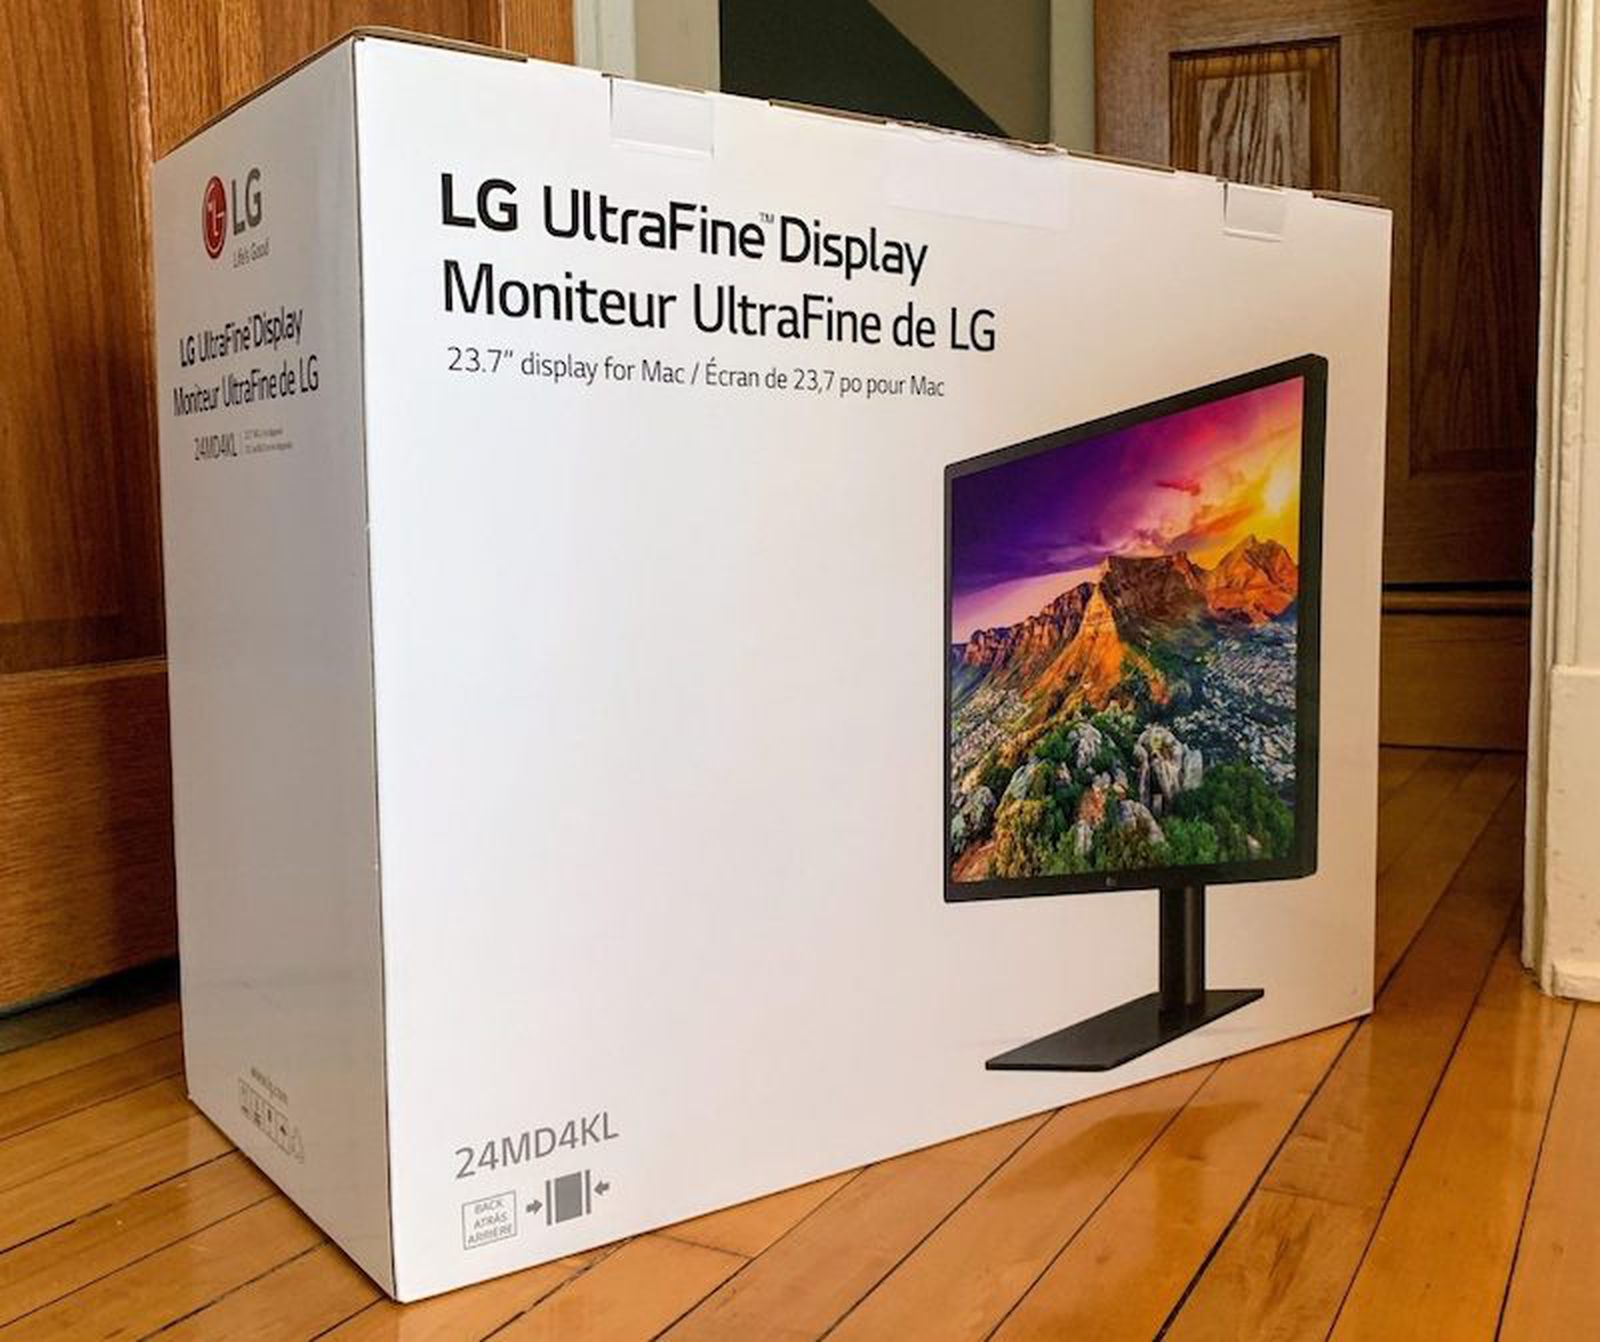 Apple Stores Quietly Carrying New LG 23.7-Inch UltraFine Display